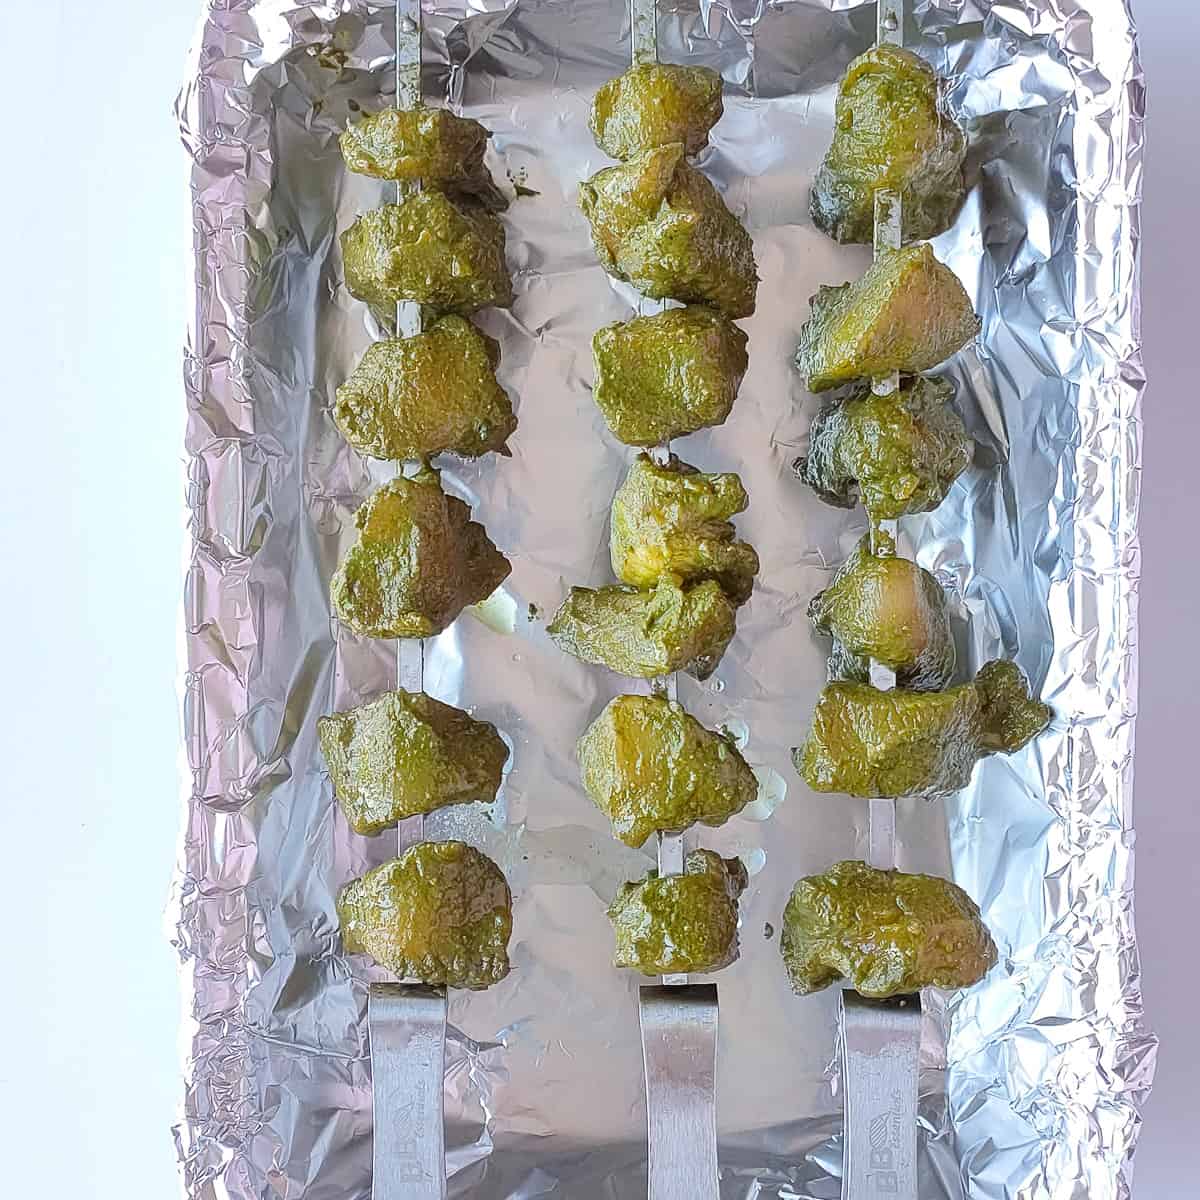 Marinated hariyali chicken tikka on skewers placed on a baking tray lined with foil.